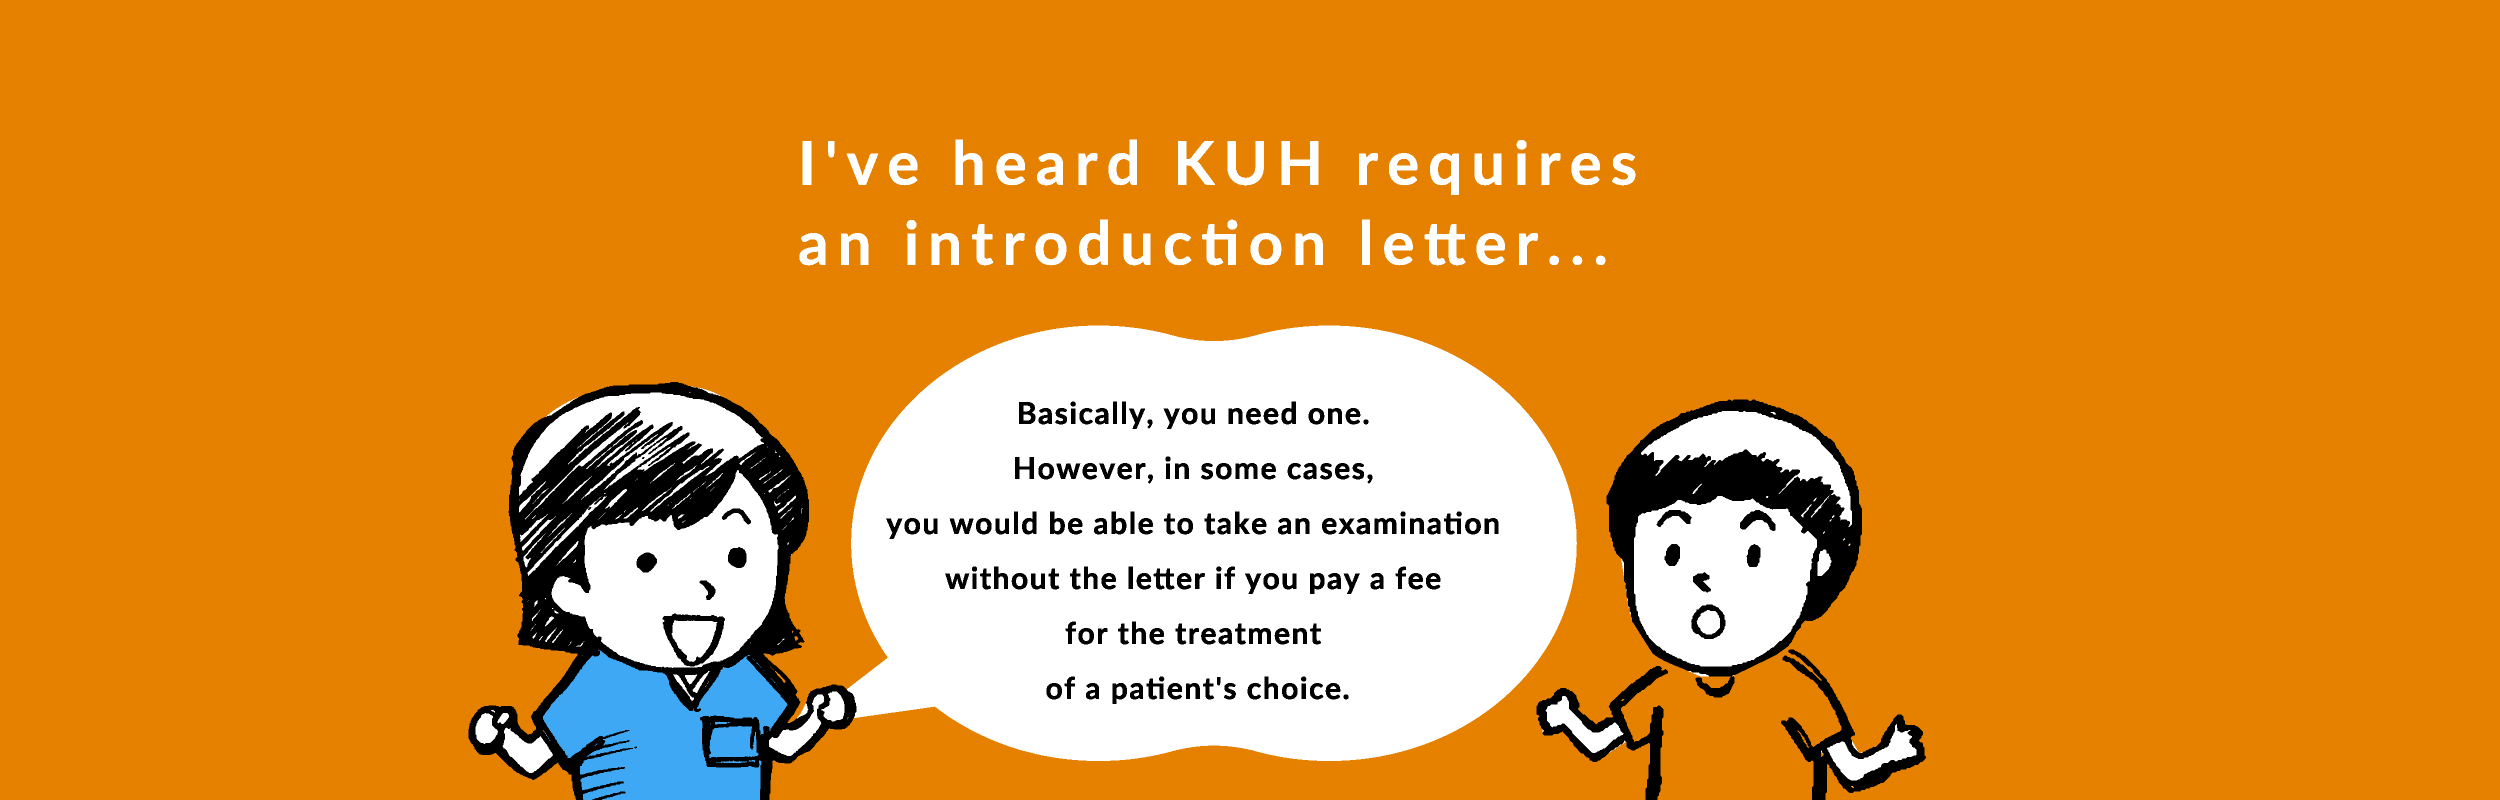 Basically, you need one. However, in some cases, you would be able to take an examination without the letter if you pay a fee for the treatment of a patient's choice.